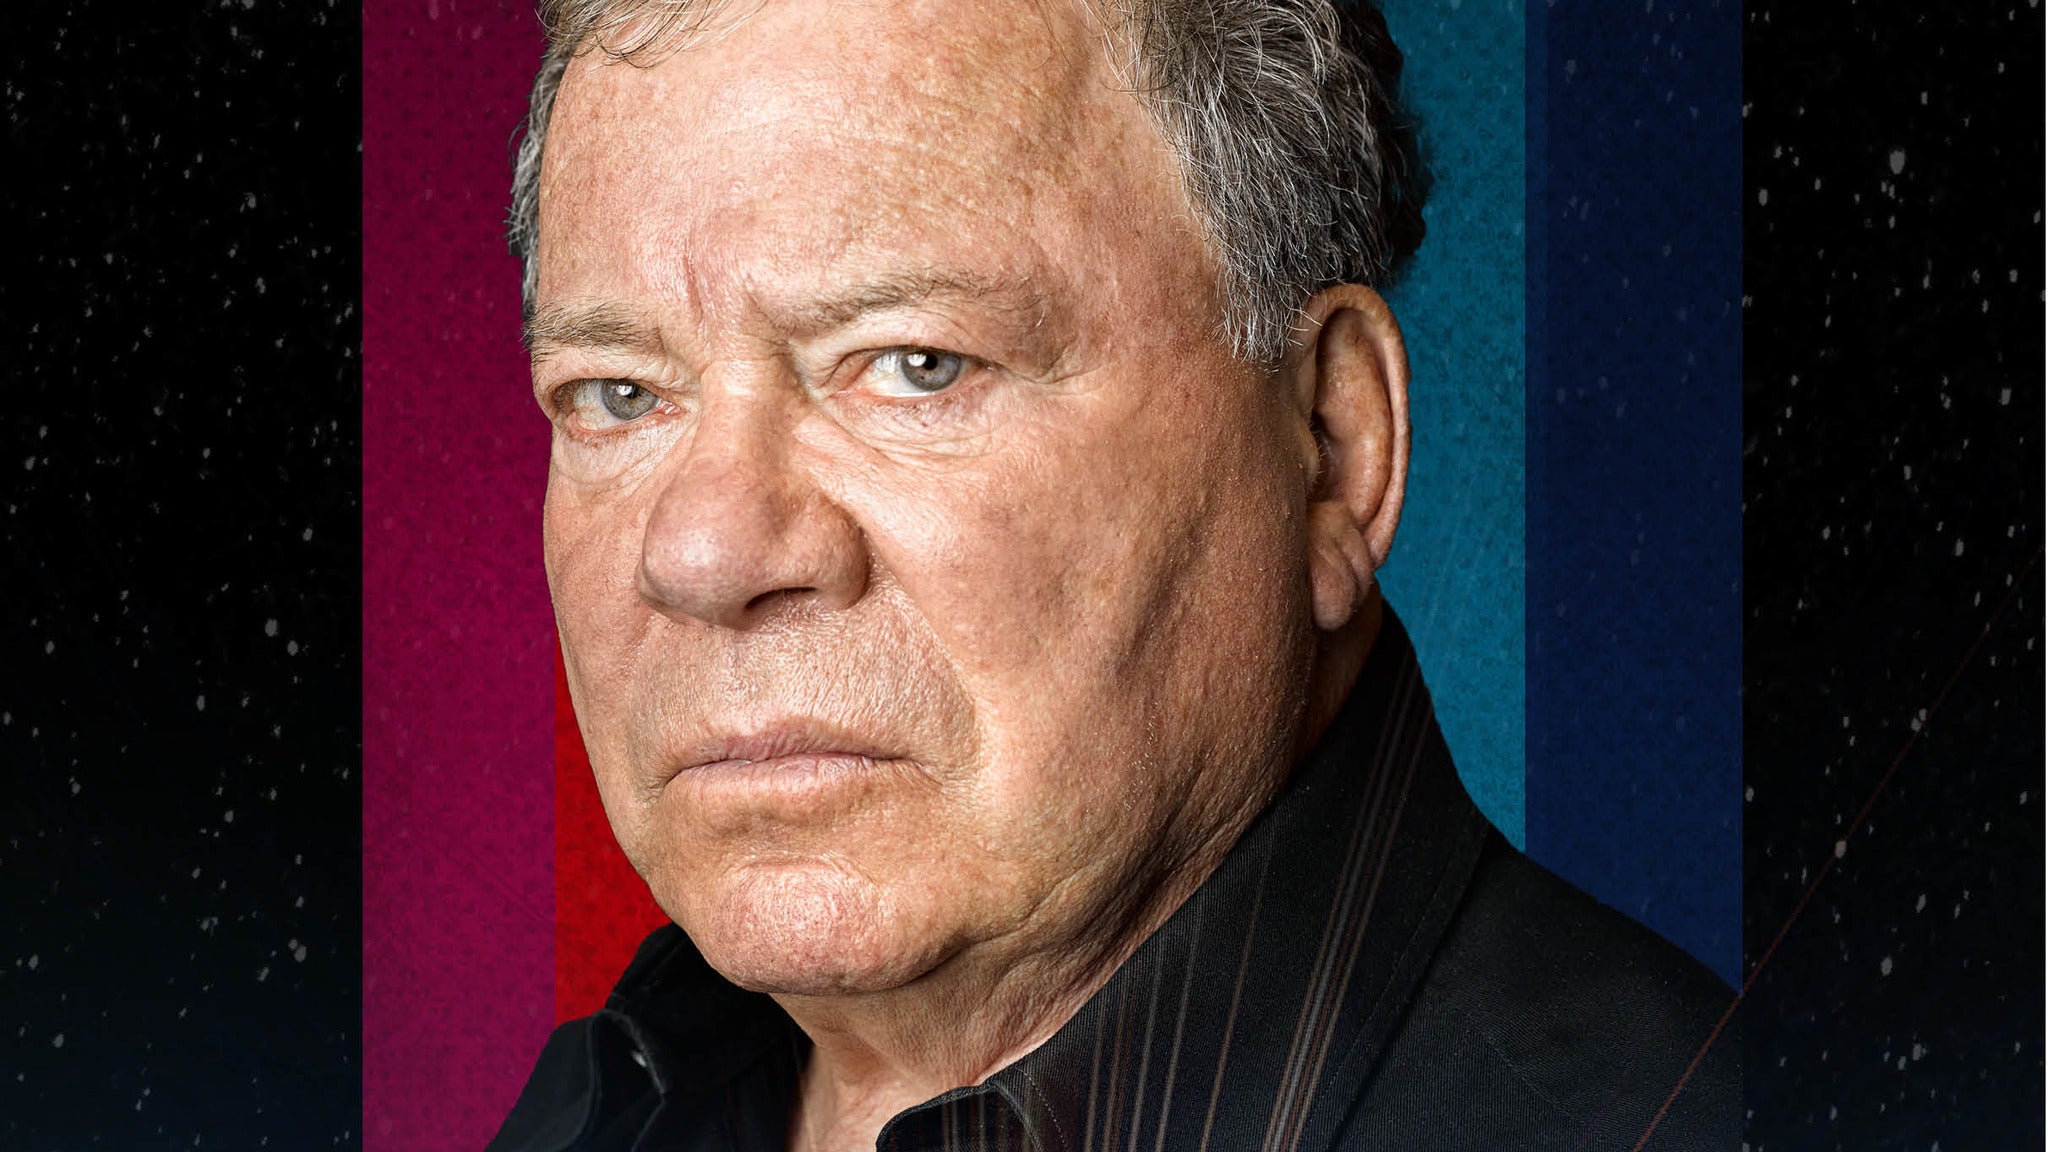 William Shatner: Live on Stage Screening of Wrath of Khan with Q & A